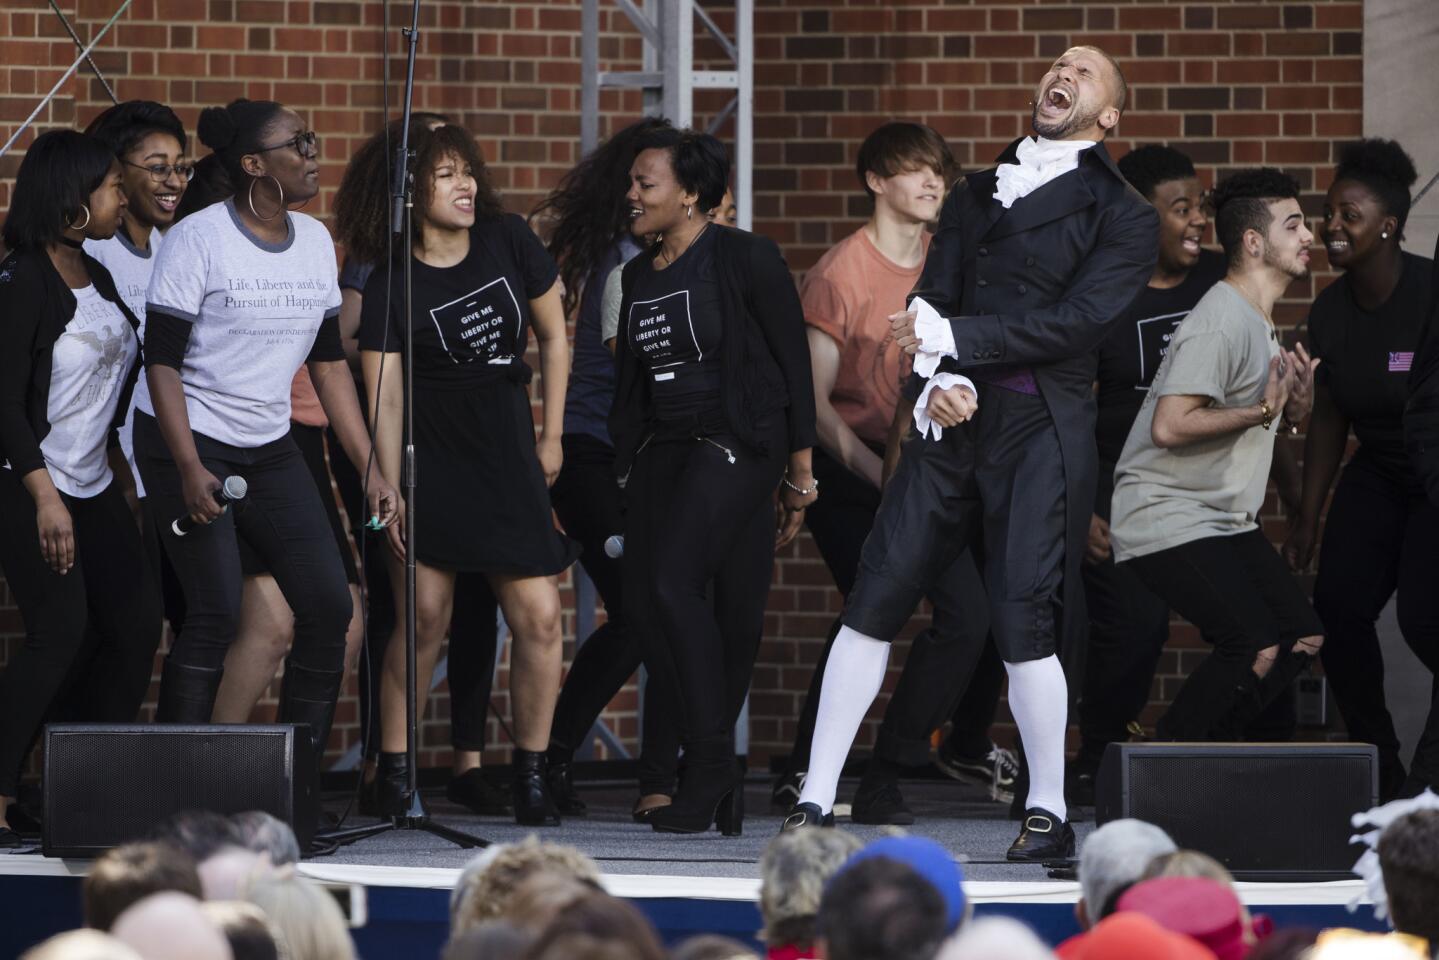 Sydney James Harcourt, an original cast member from the Broadway musical "Hamilton" performs with students from the Philadelphia High School for the Creative and Performing Arts during opening ceremonies for the Museum of the American Revolution in Philadelphia, Wednesday, April 19, 2017. For more about the museum, click here.